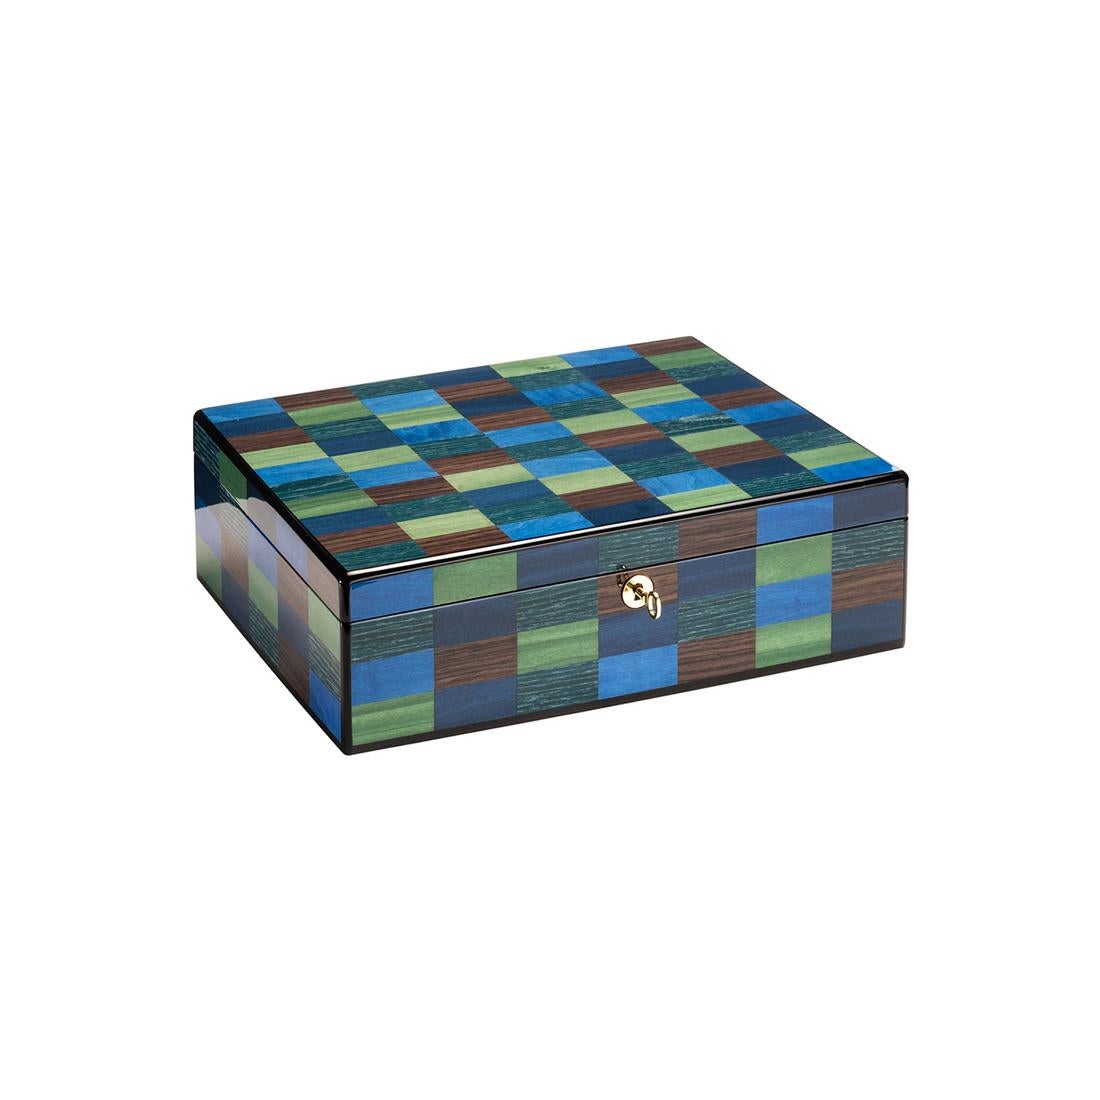 A splendid piece of functional decor fit for a private office or studio, this watch case is distinguished by an exquisite handmade inlay work of a series of colorful rectangles of modern inspiration. Enriched with gold-finished metal details, it is